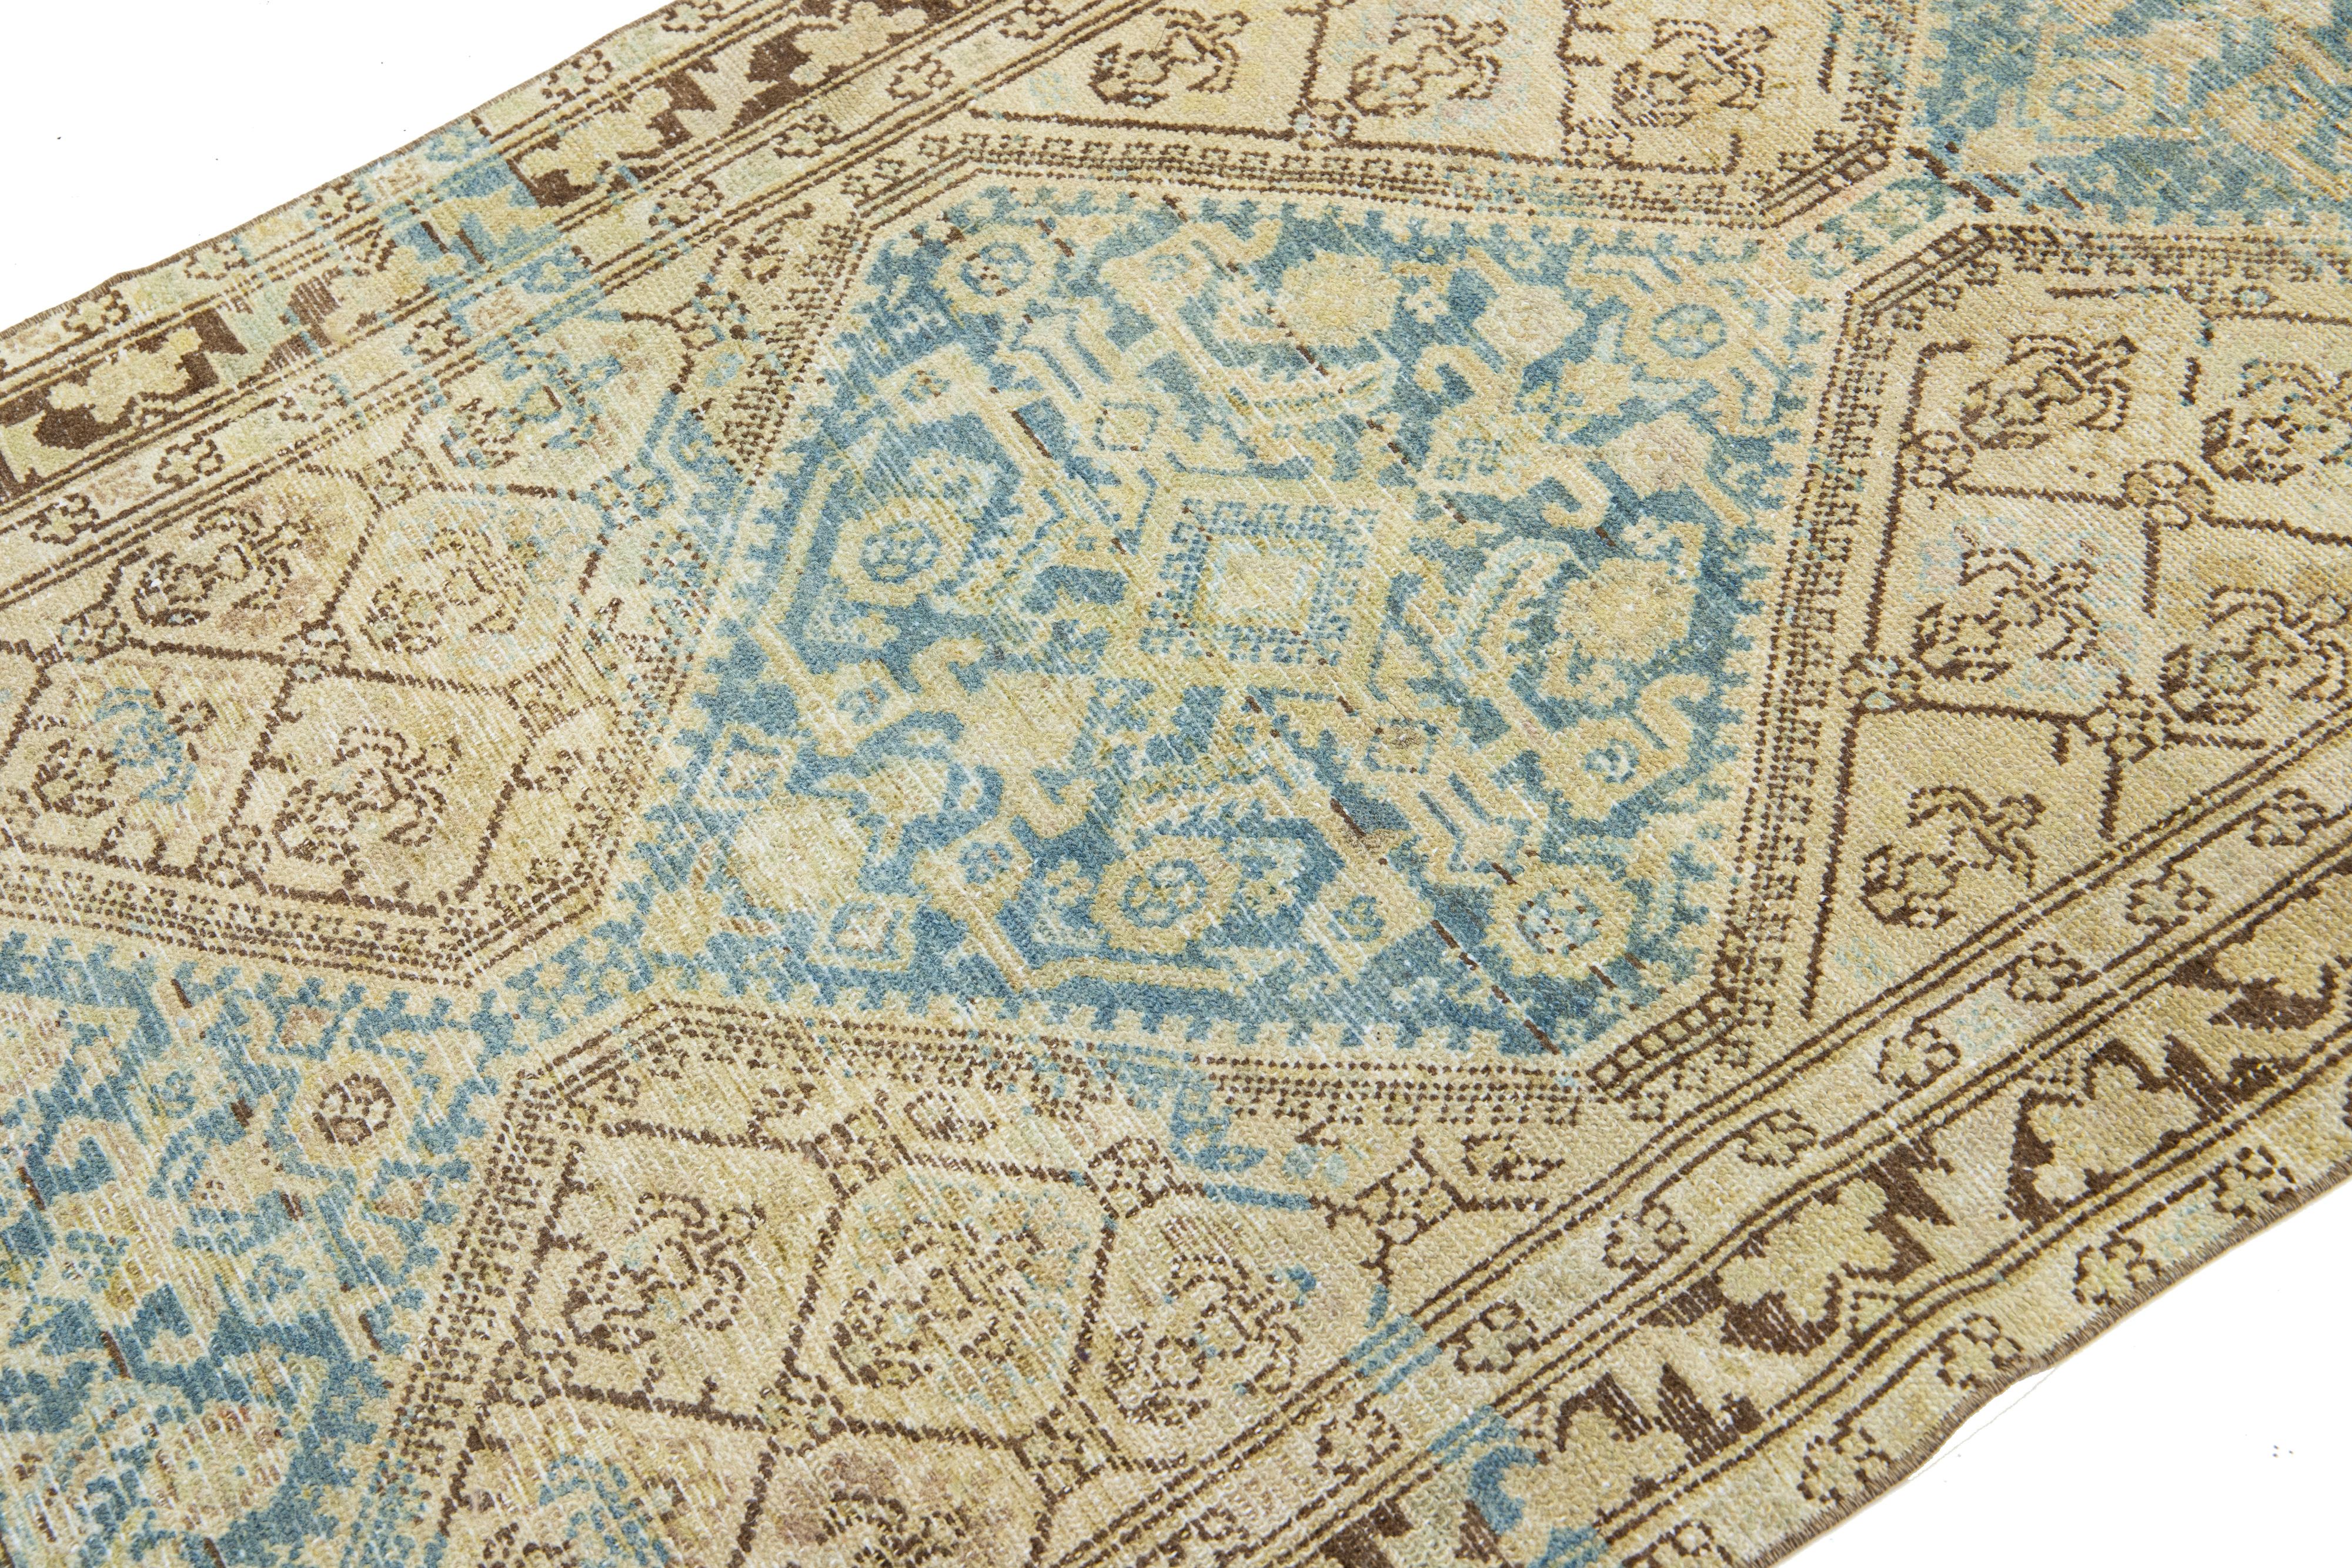 Hand-Knotted 1920s Persian Malayer Wool Runner with Tribal Design In Blue For Sale